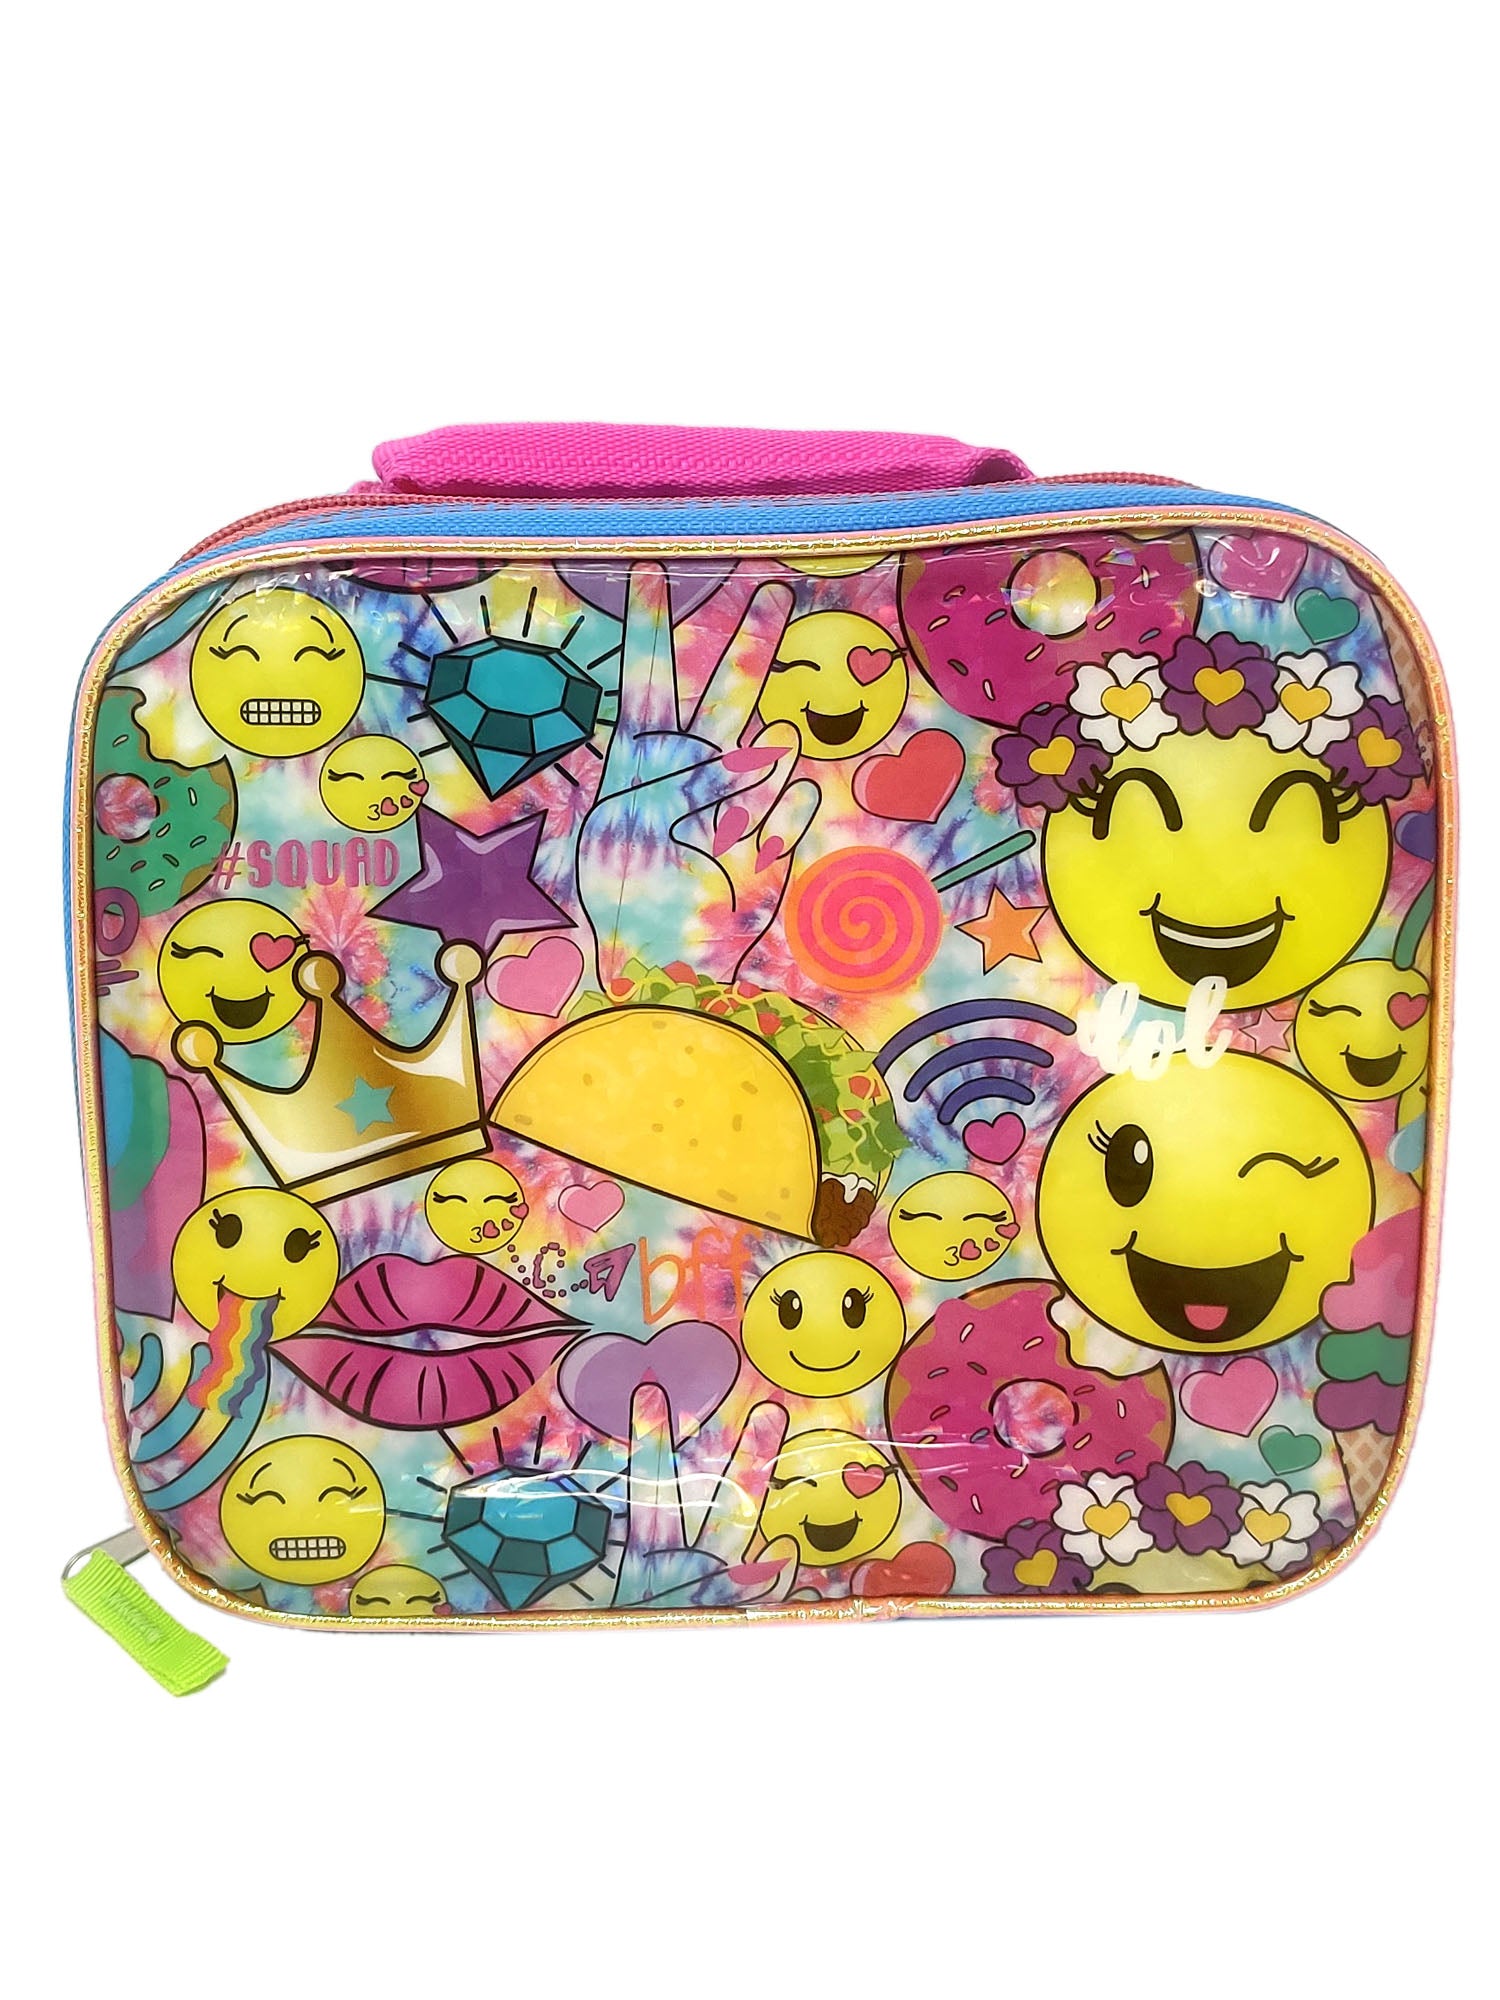 Emojis Insulated Lunch Bag Insulated With 2-Piece Food Containers Set